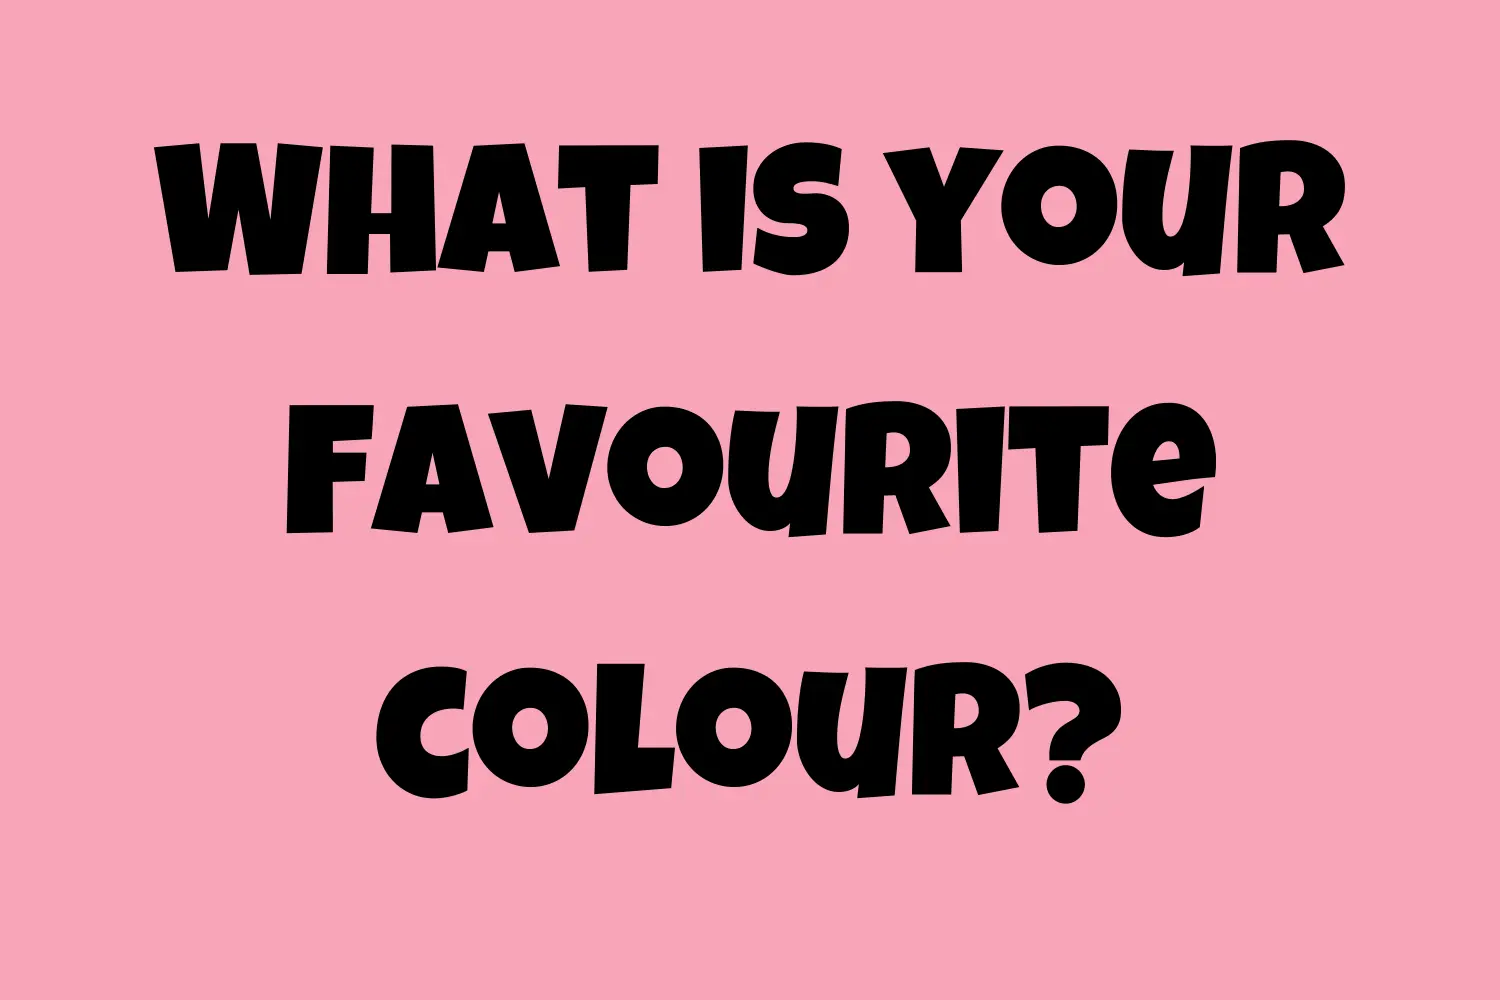 What is your favourite colour?